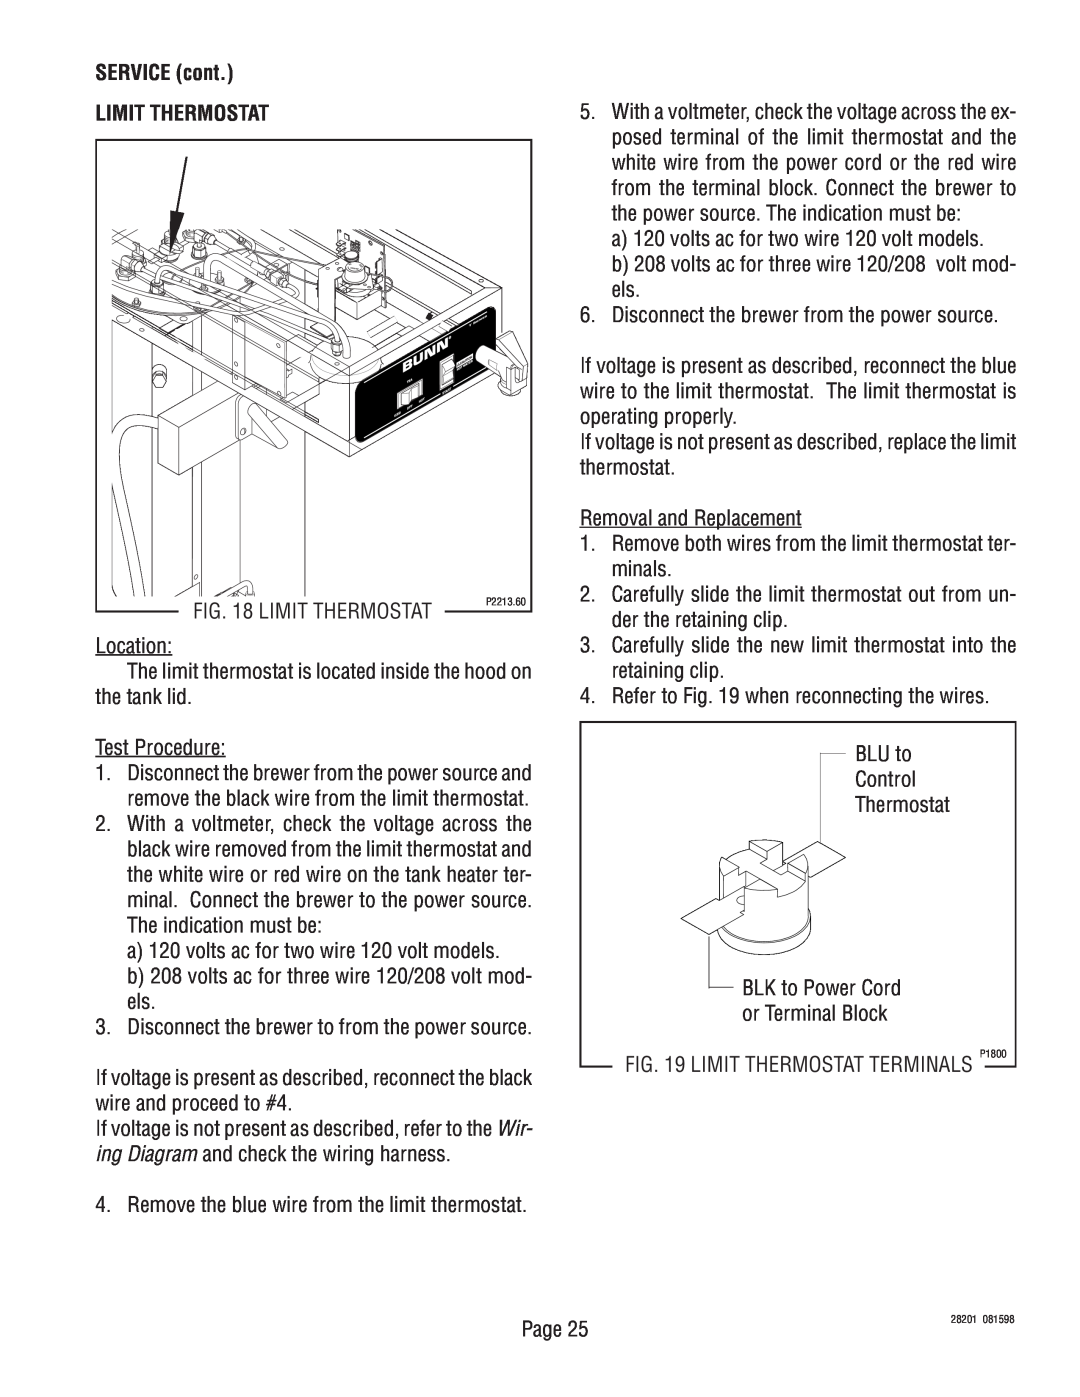 Bunn TNTF-3 service manual SERVICE cont LIMIT THERMOSTAT, BLK to Power Cord or Terminal Block 